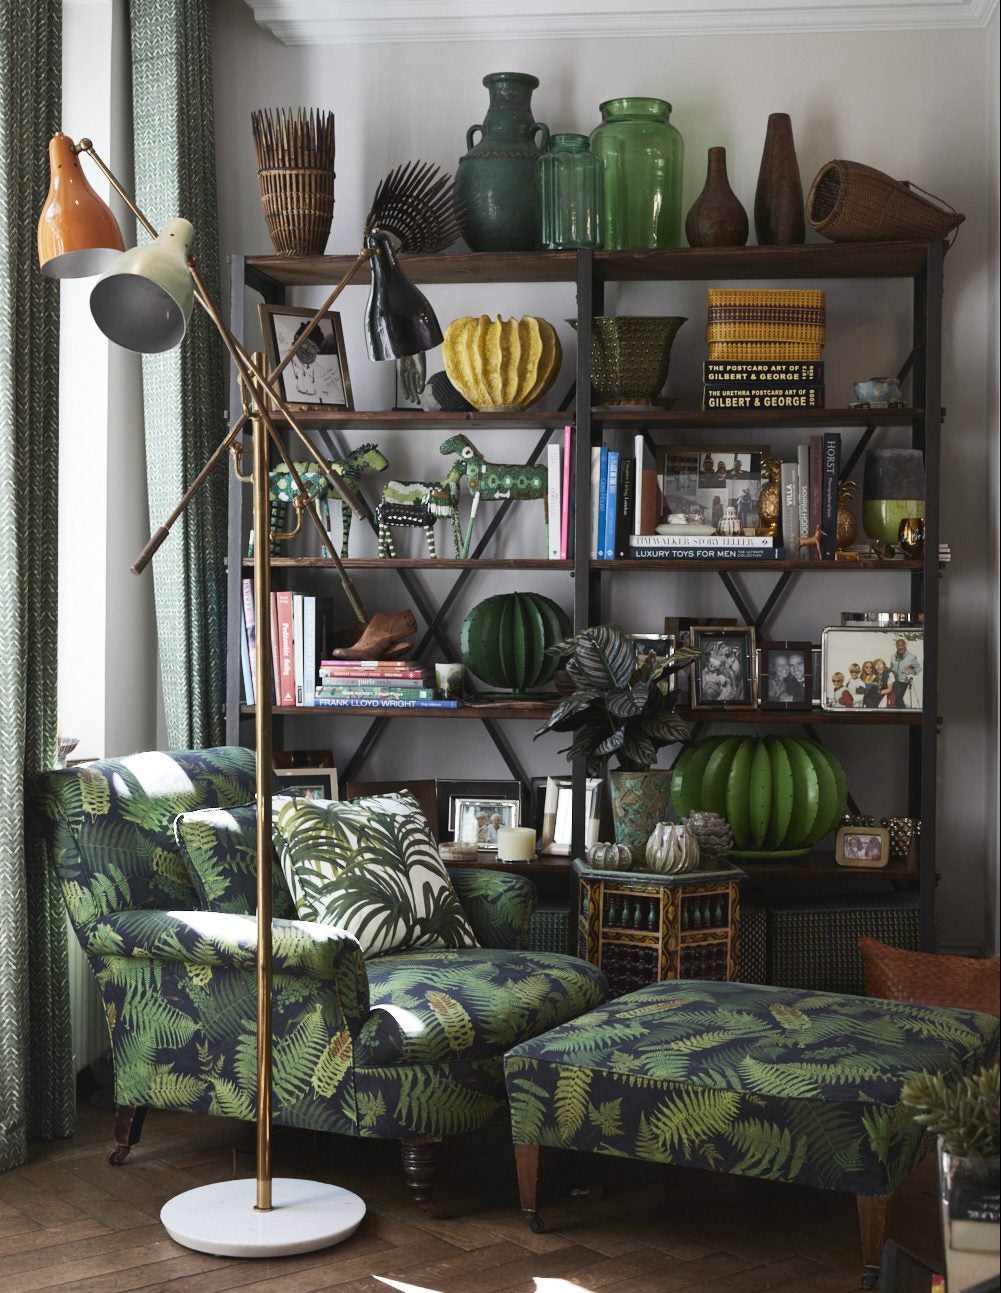 armchair and ottoman in green leafy pattern